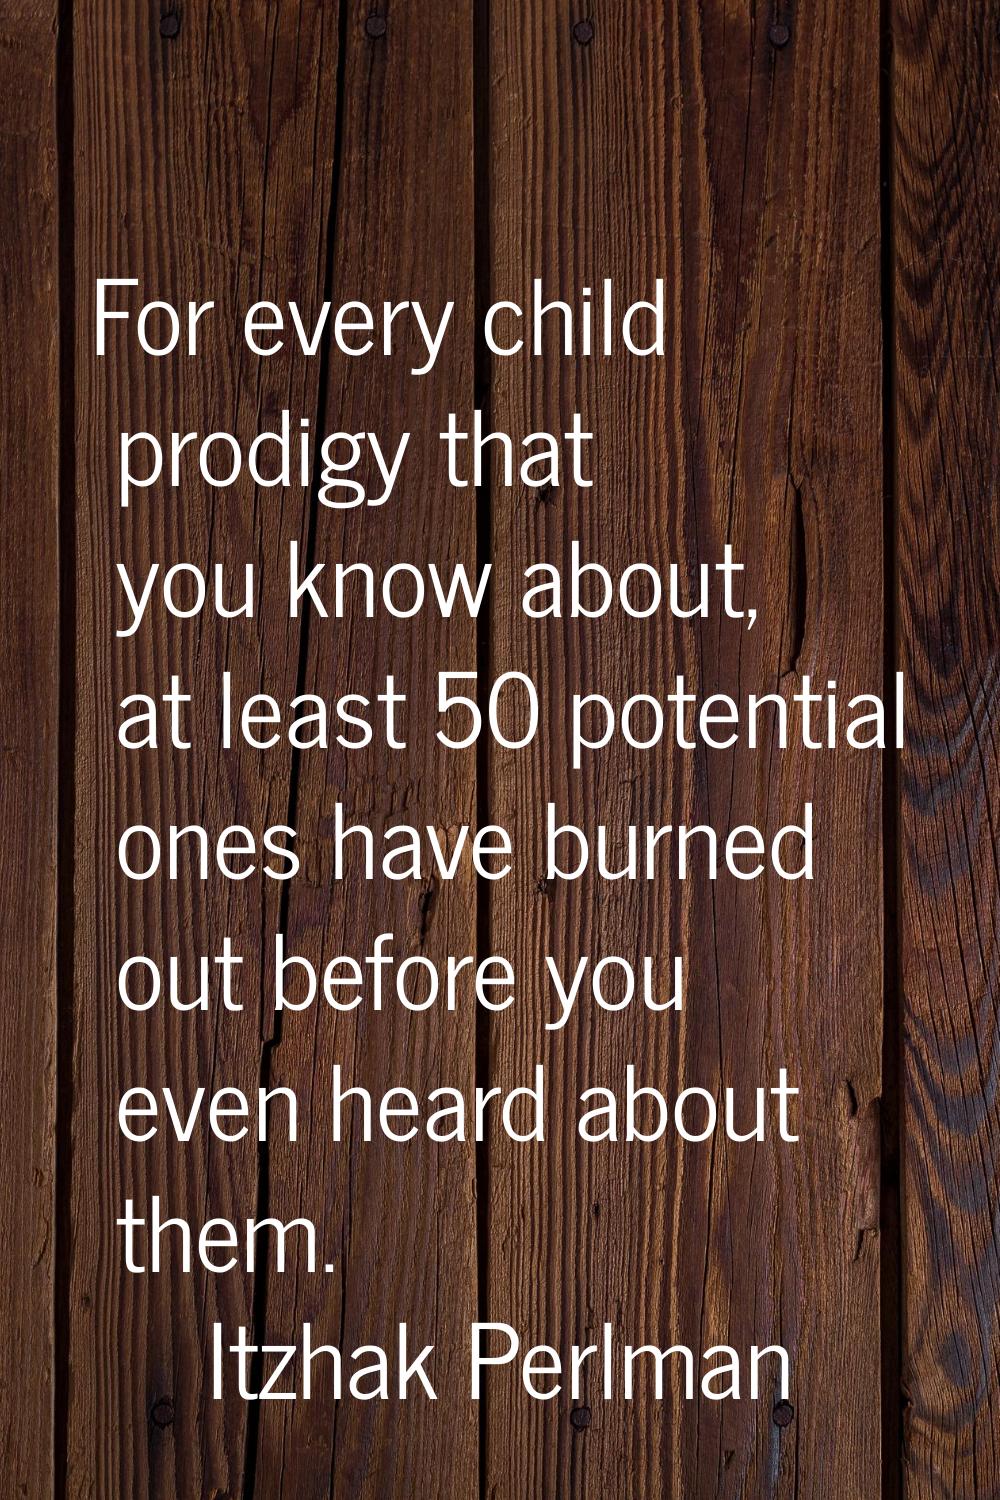 For every child prodigy that you know about, at least 50 potential ones have burned out before you 